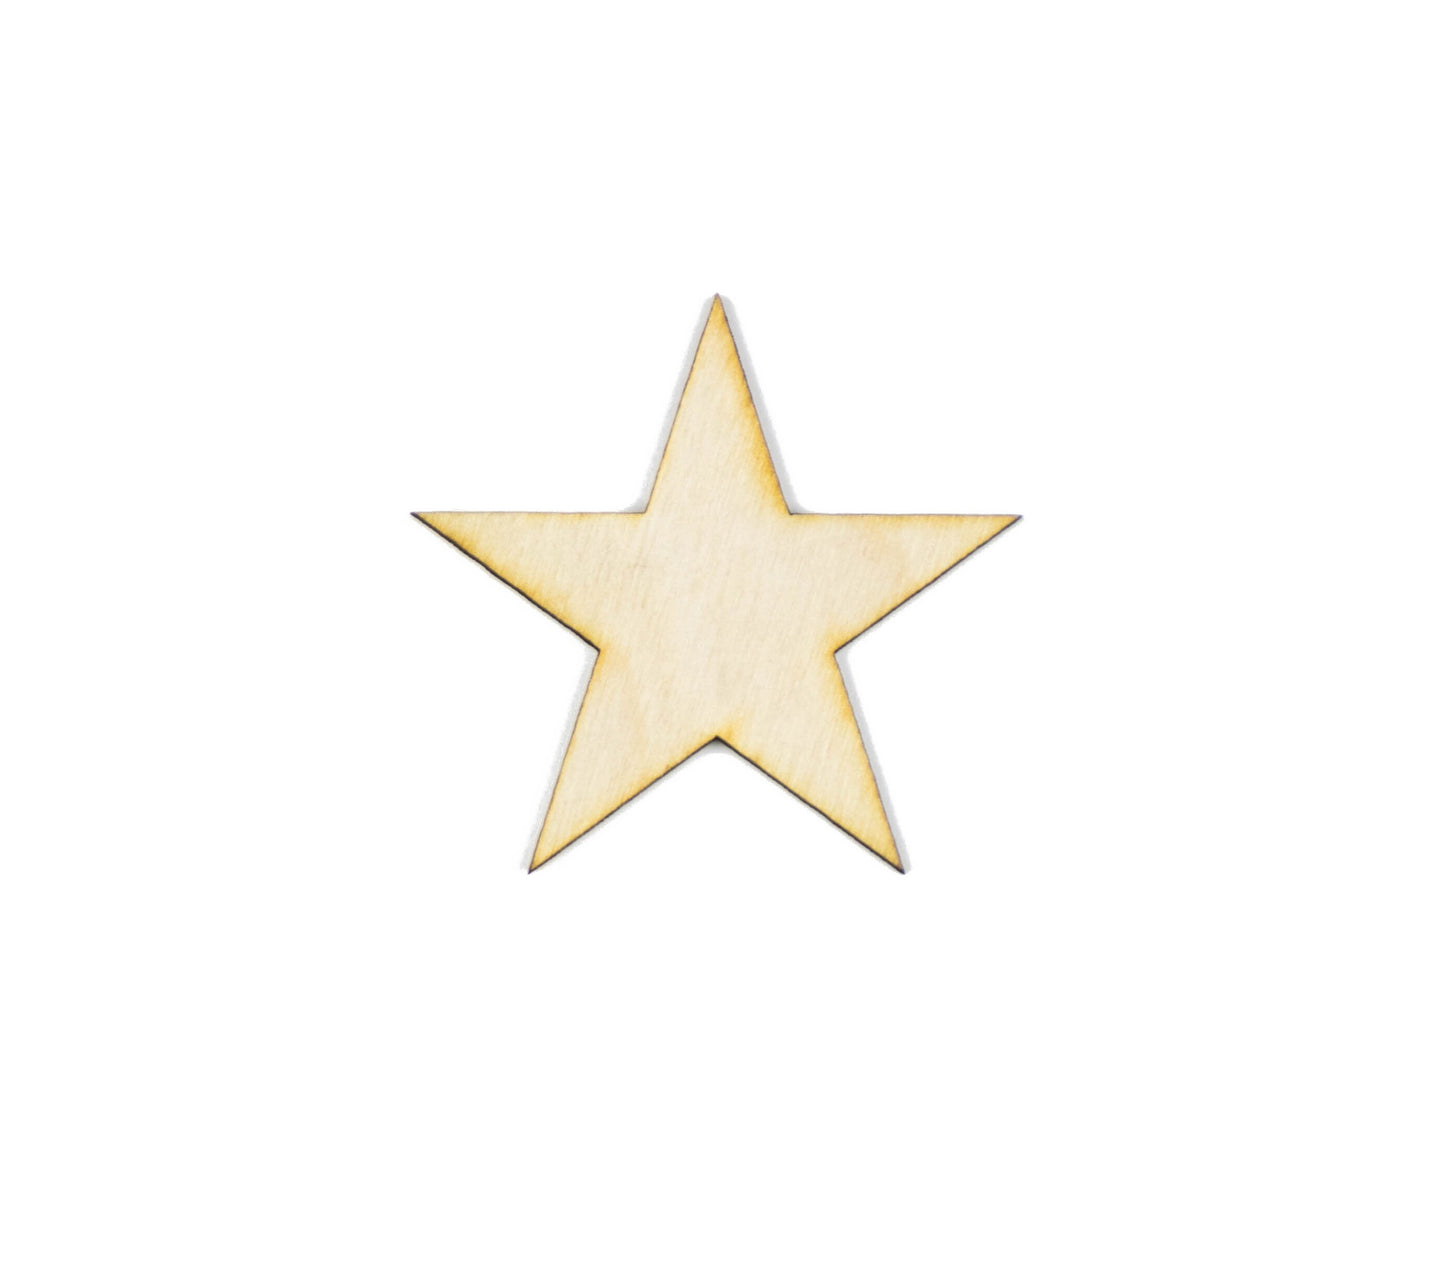 Star-Blank Wood Cutout-Stars And Star Shape Decor-Various Sizes-DIY Crafts-Star Party Theme Favors-Patriotic Home Decor-Classic Star Shape